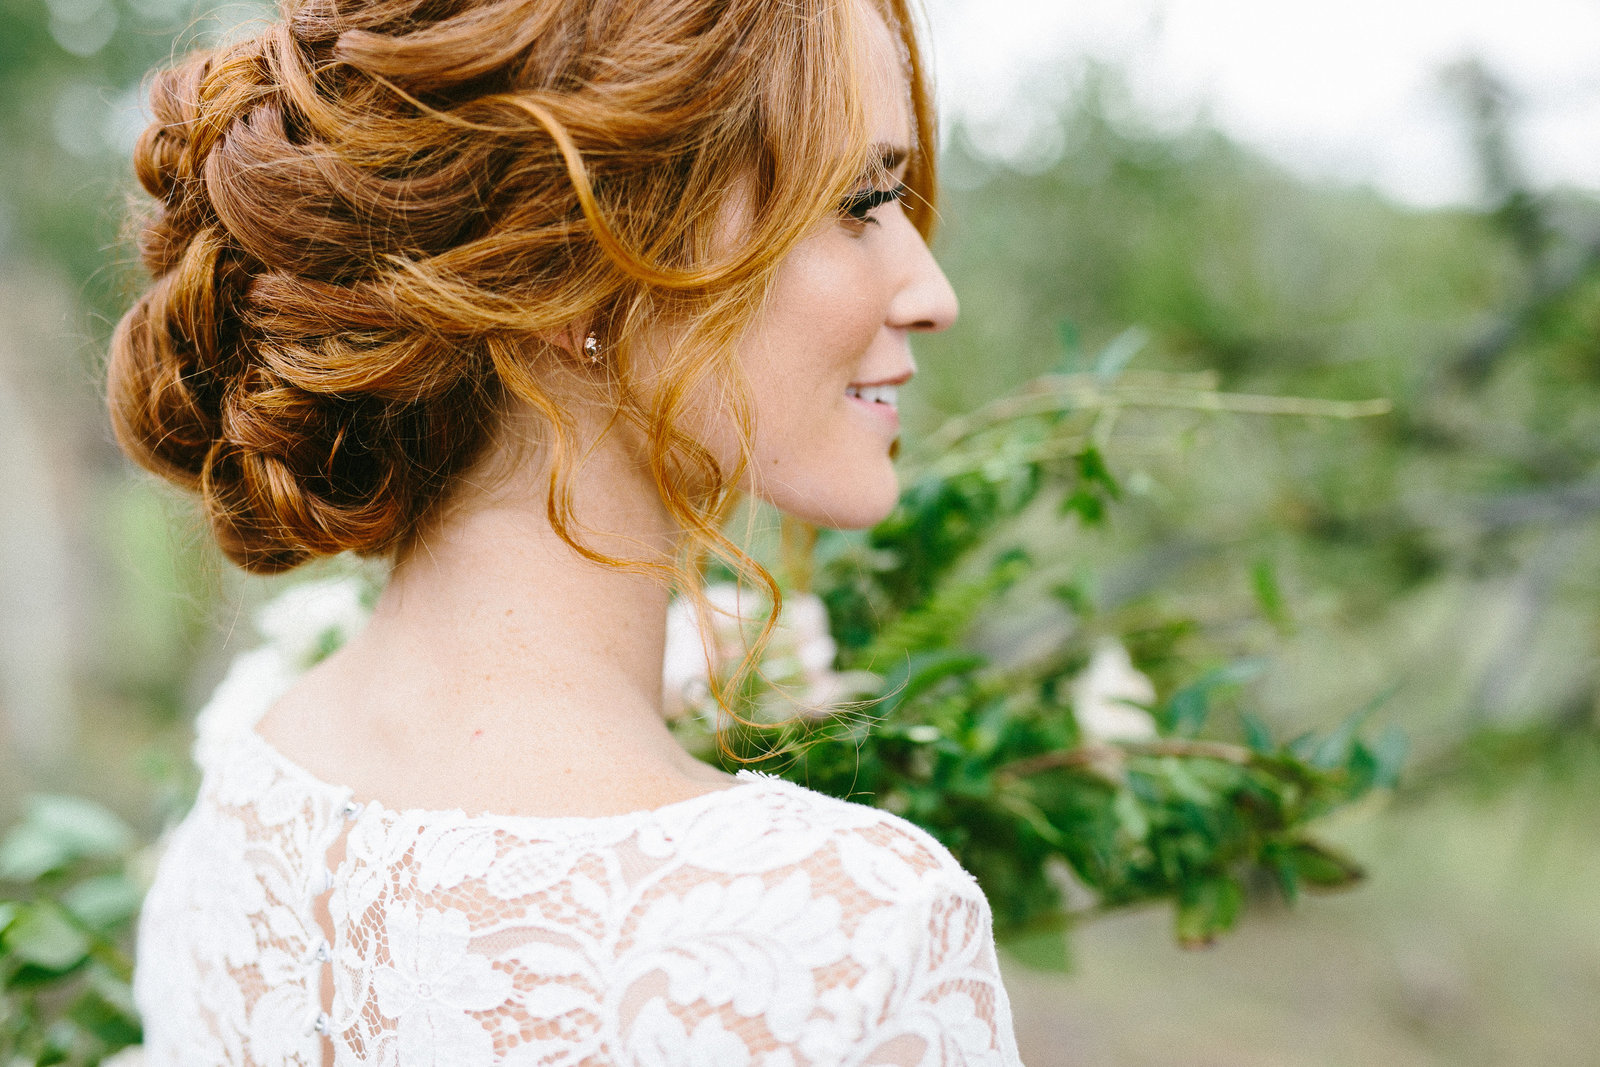 houston wedding photographer becki of smith house photography travelled to colorado for a mountain bridal portrait session with a sarah seven gown